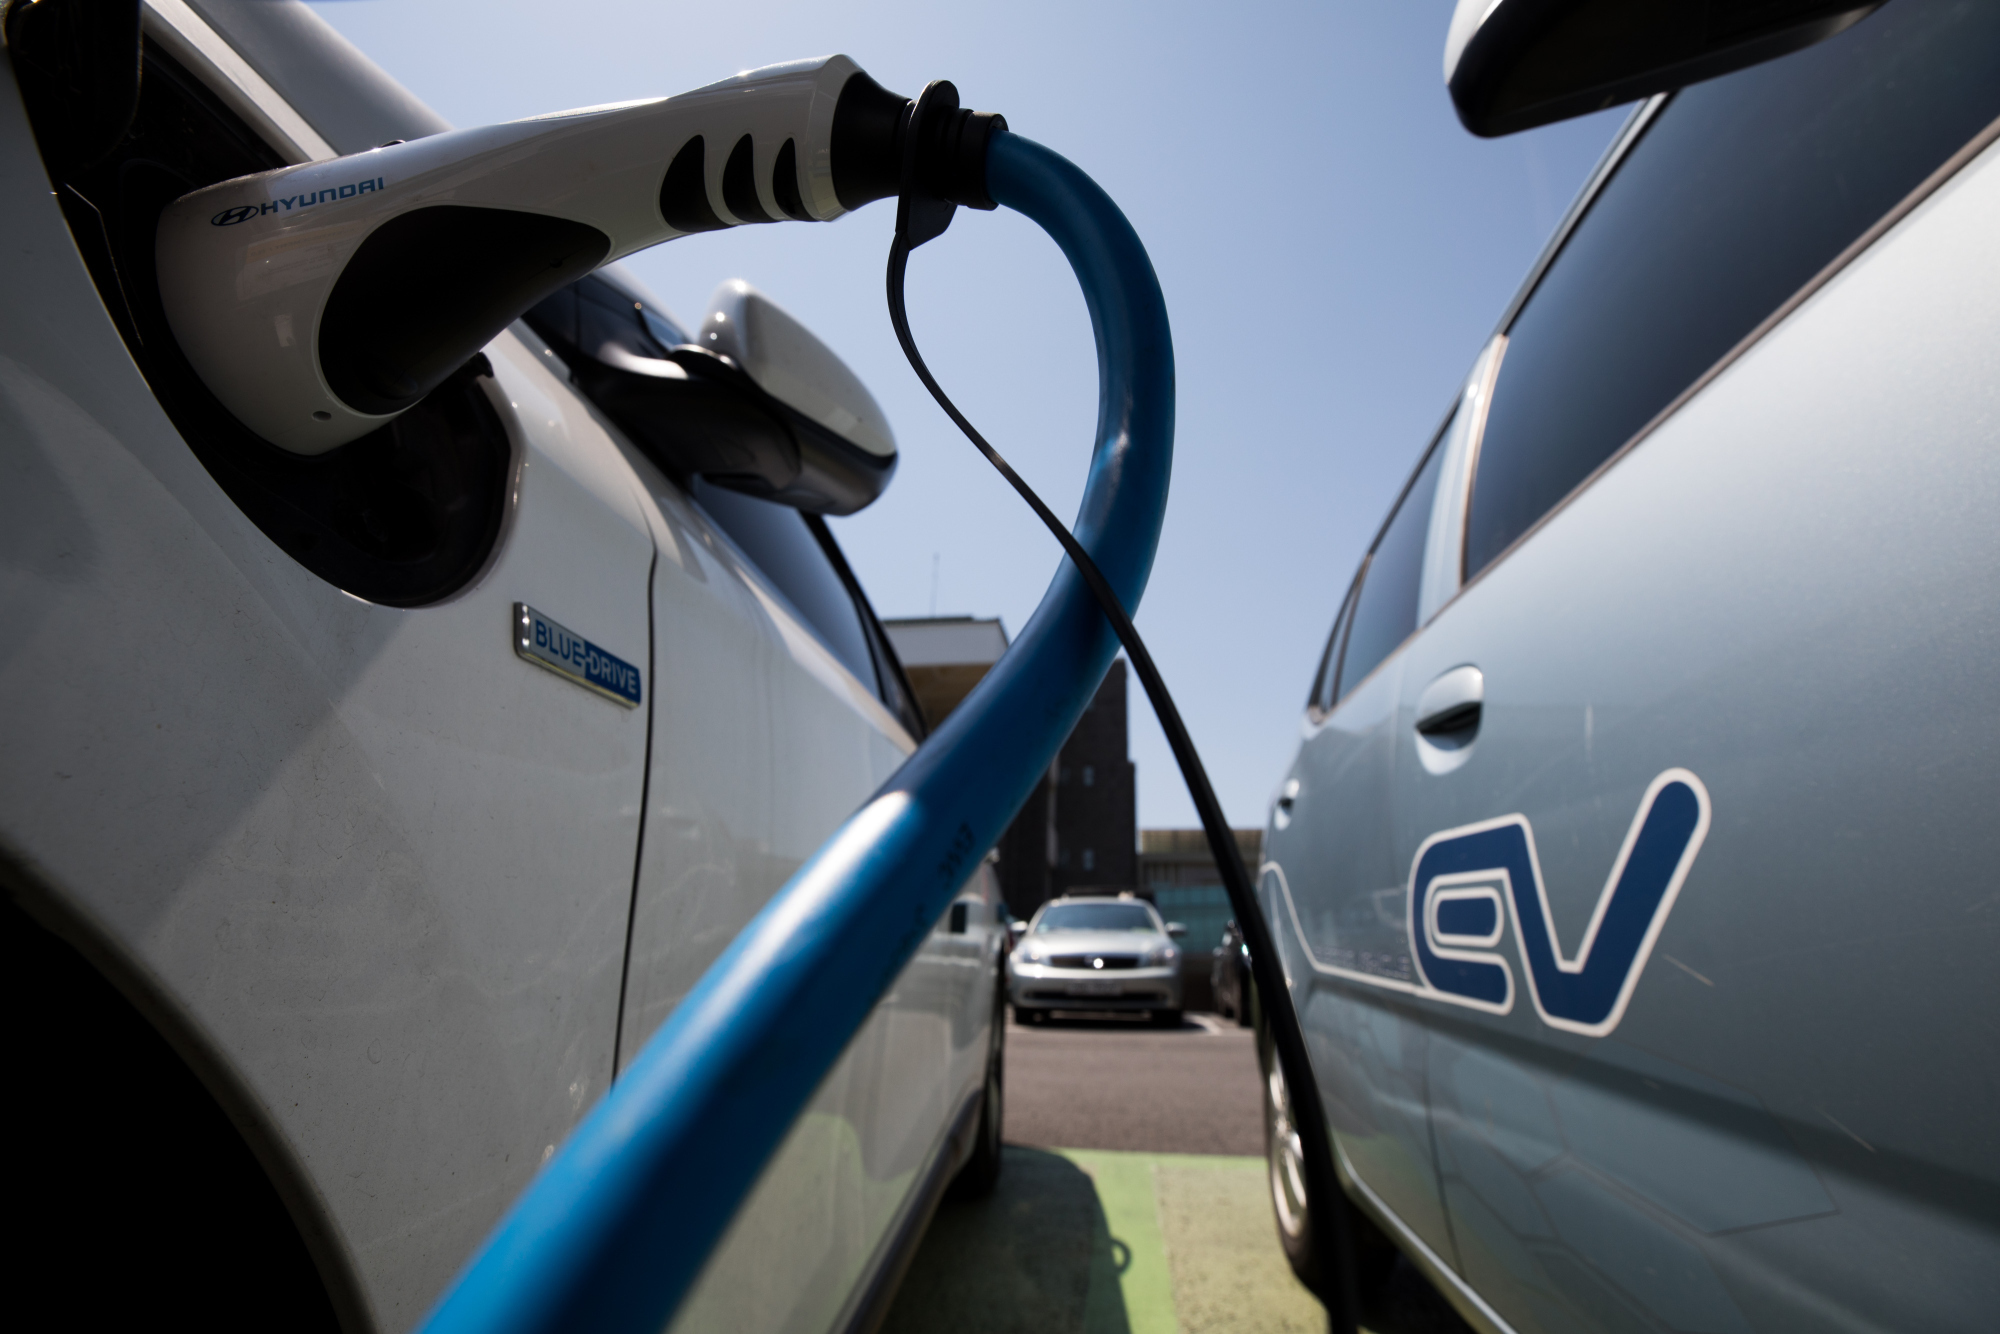 Smart public electric vehicle charging points launched - News for the